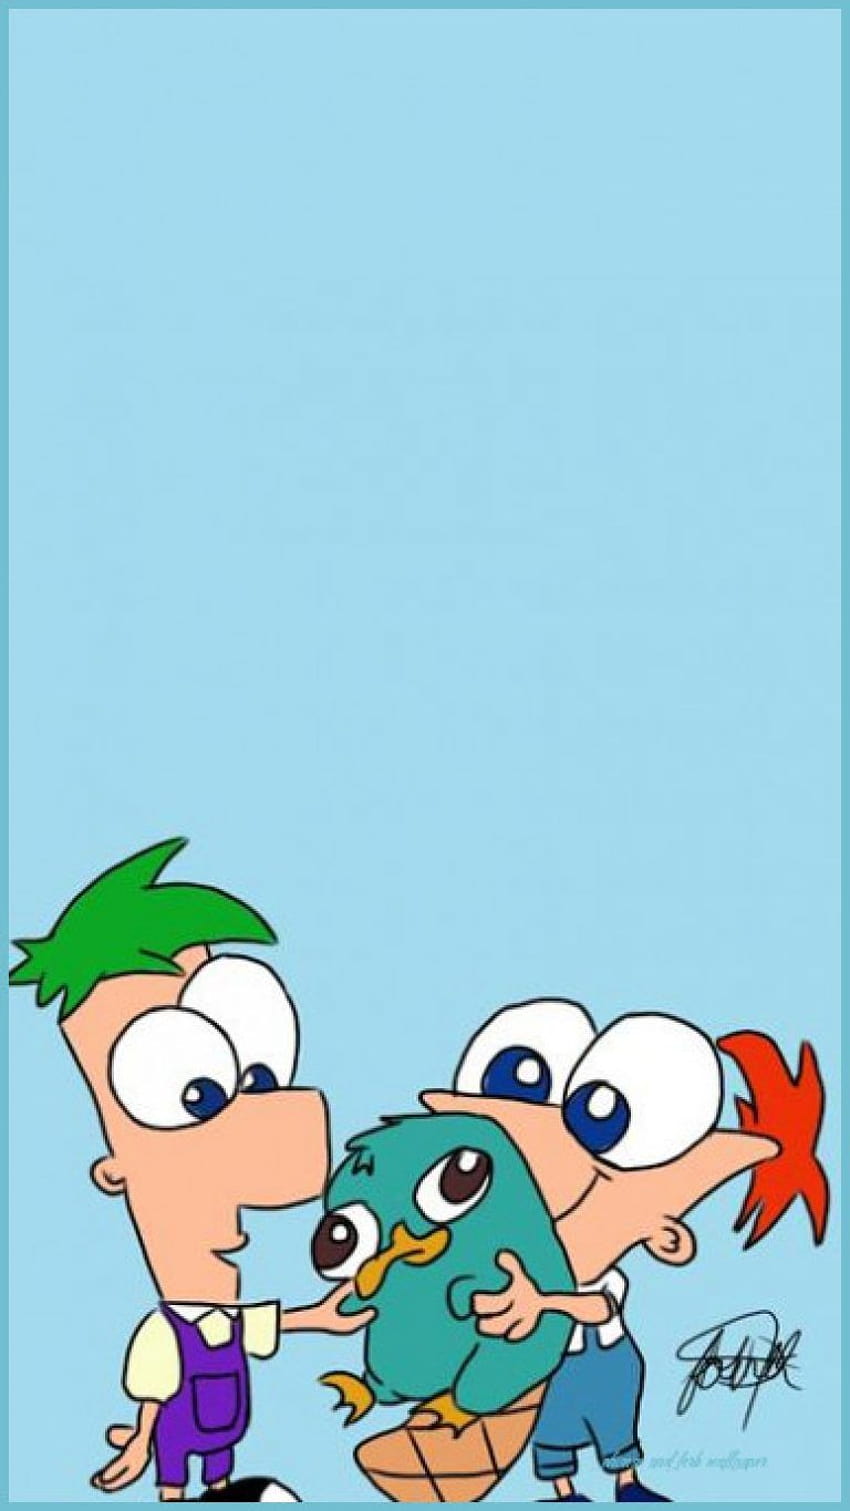 Phineas and ferb wallpaper  Phineas and ferb Cartoon wallpaper Locked  wallpaper